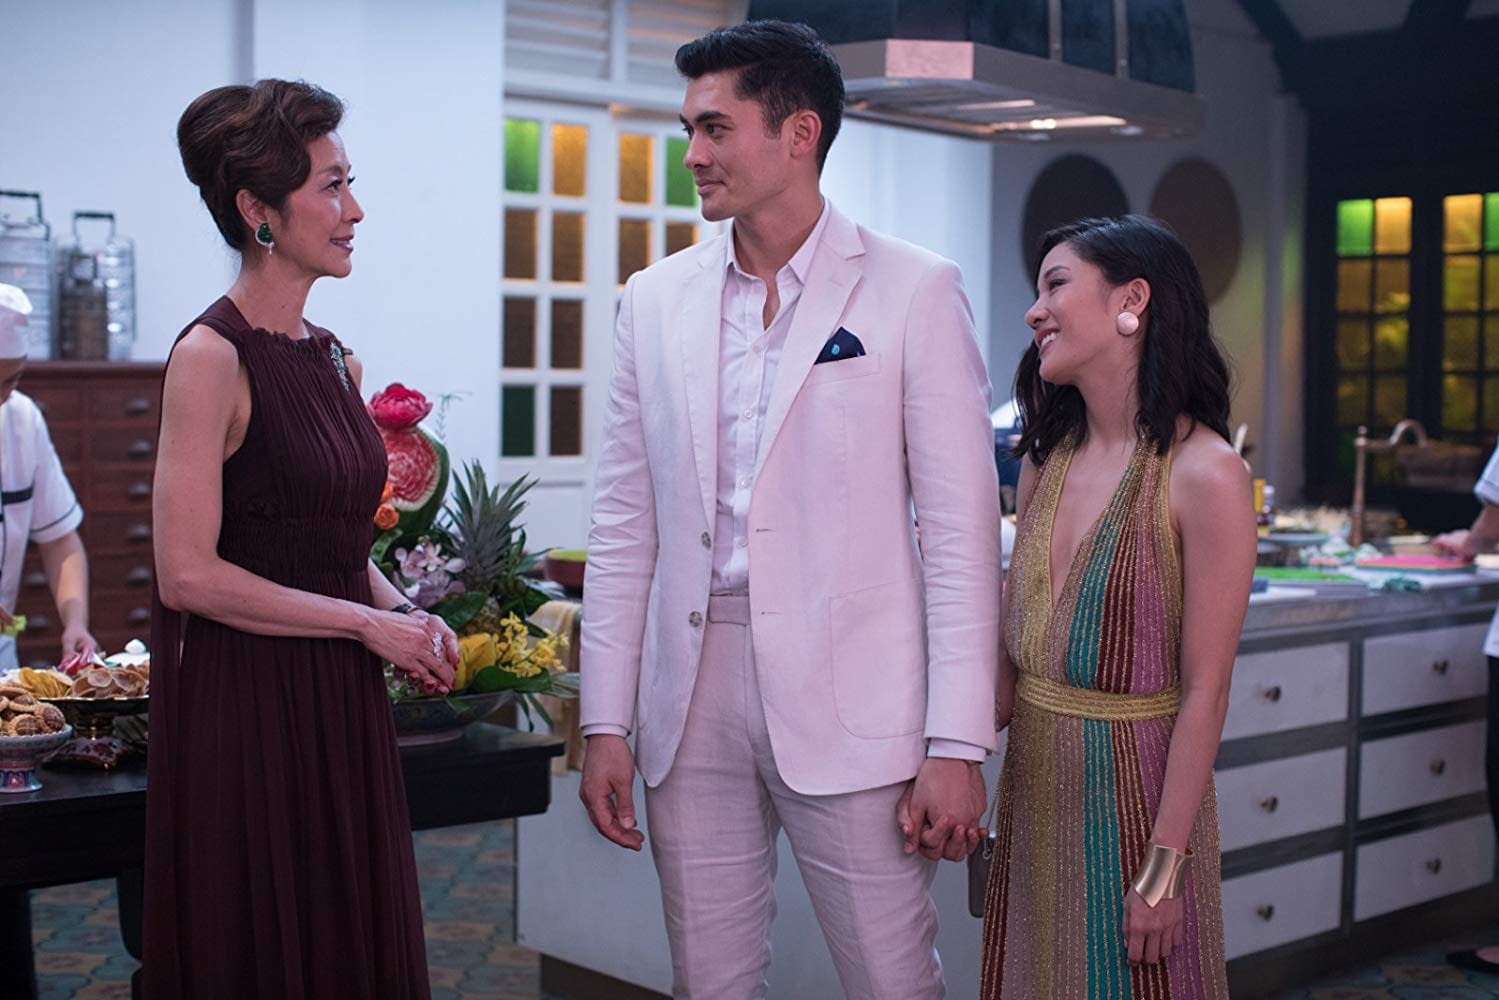 [Review] 'Crazy Rich Asians': Not Very Original, but the Charming Cast Carries It